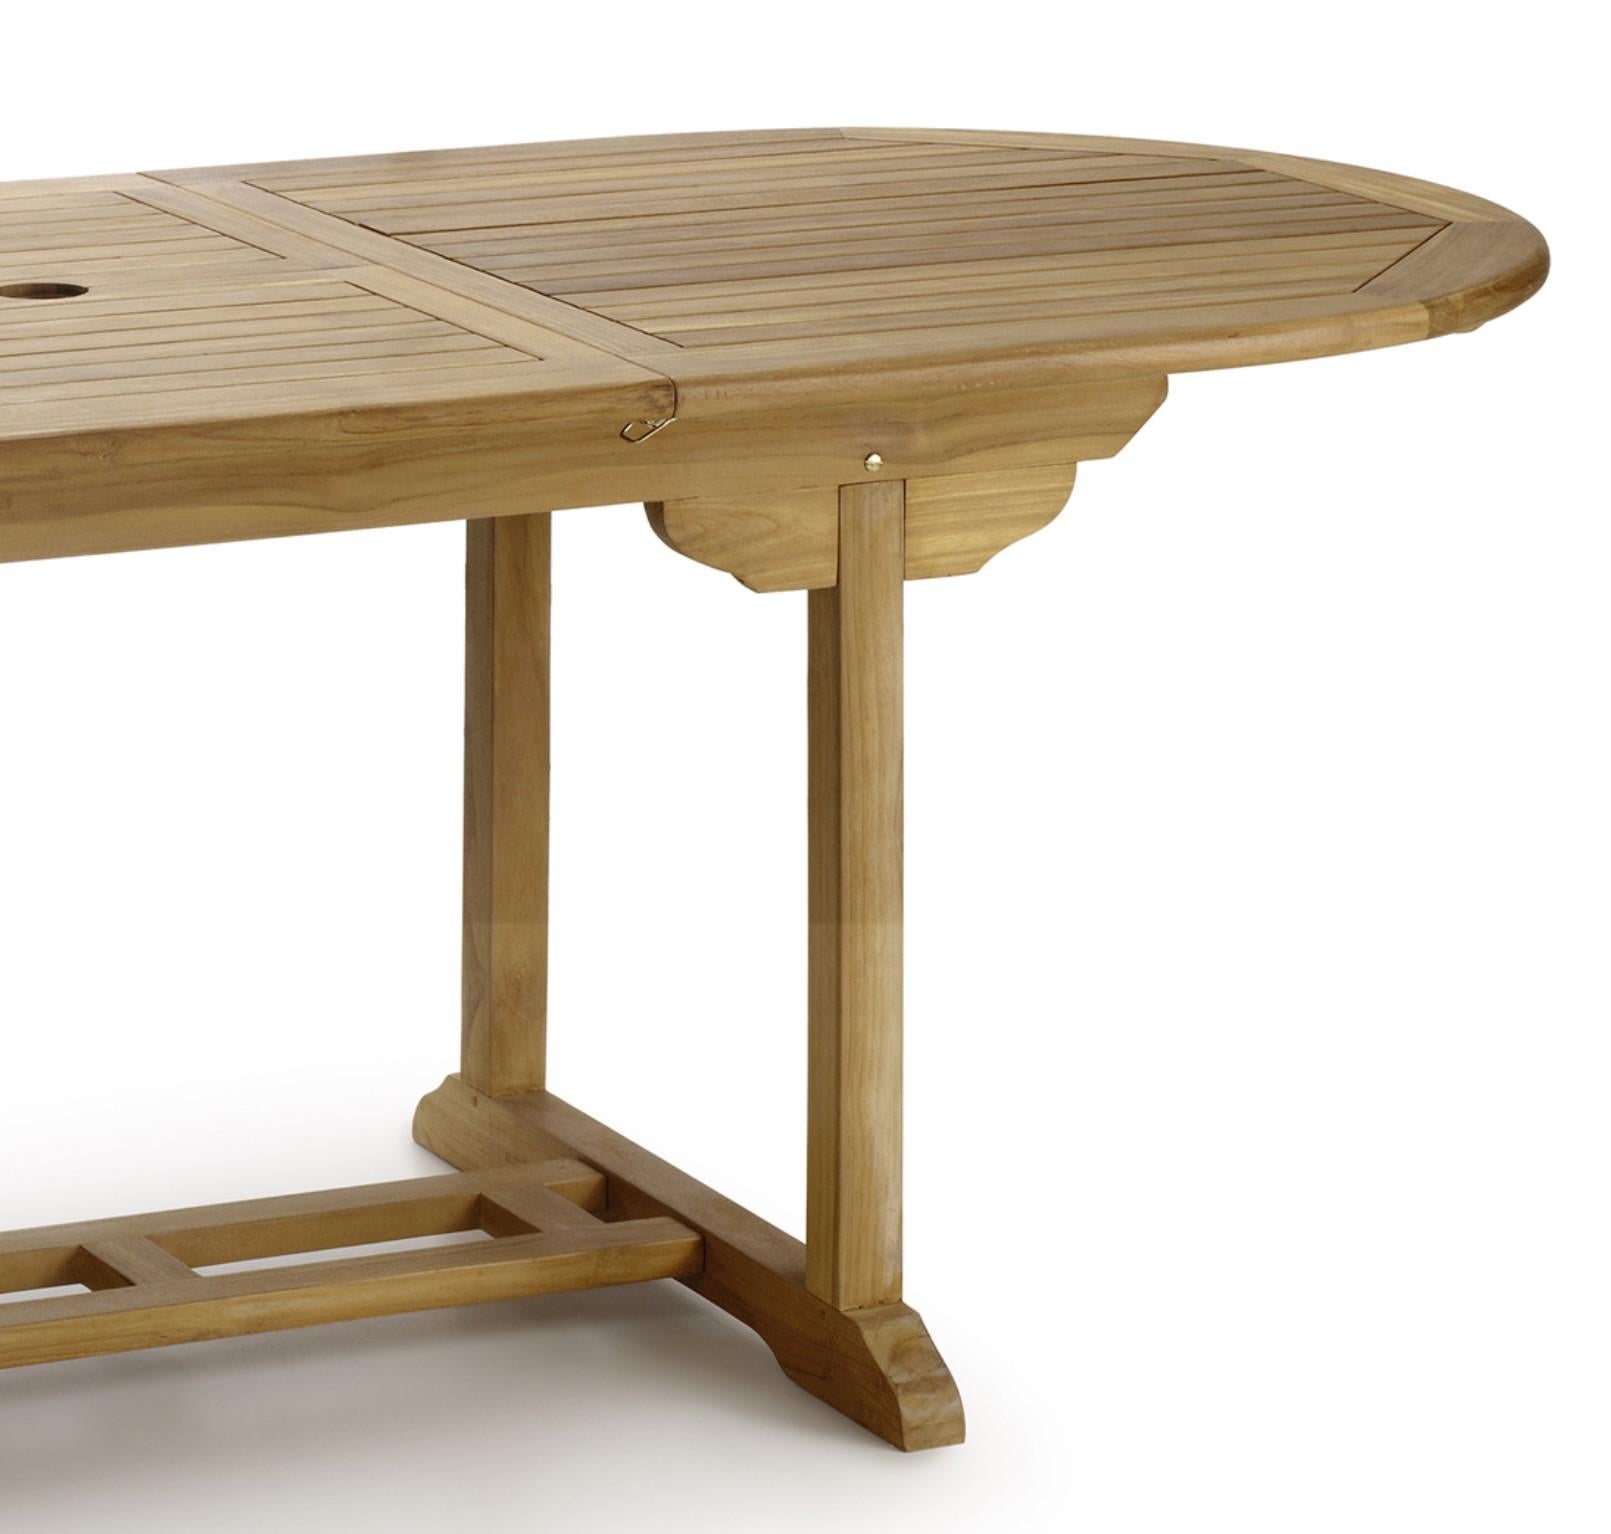 Modern New Teak Oval Foldable Dining Table, Indoor and Outdoor For Sale